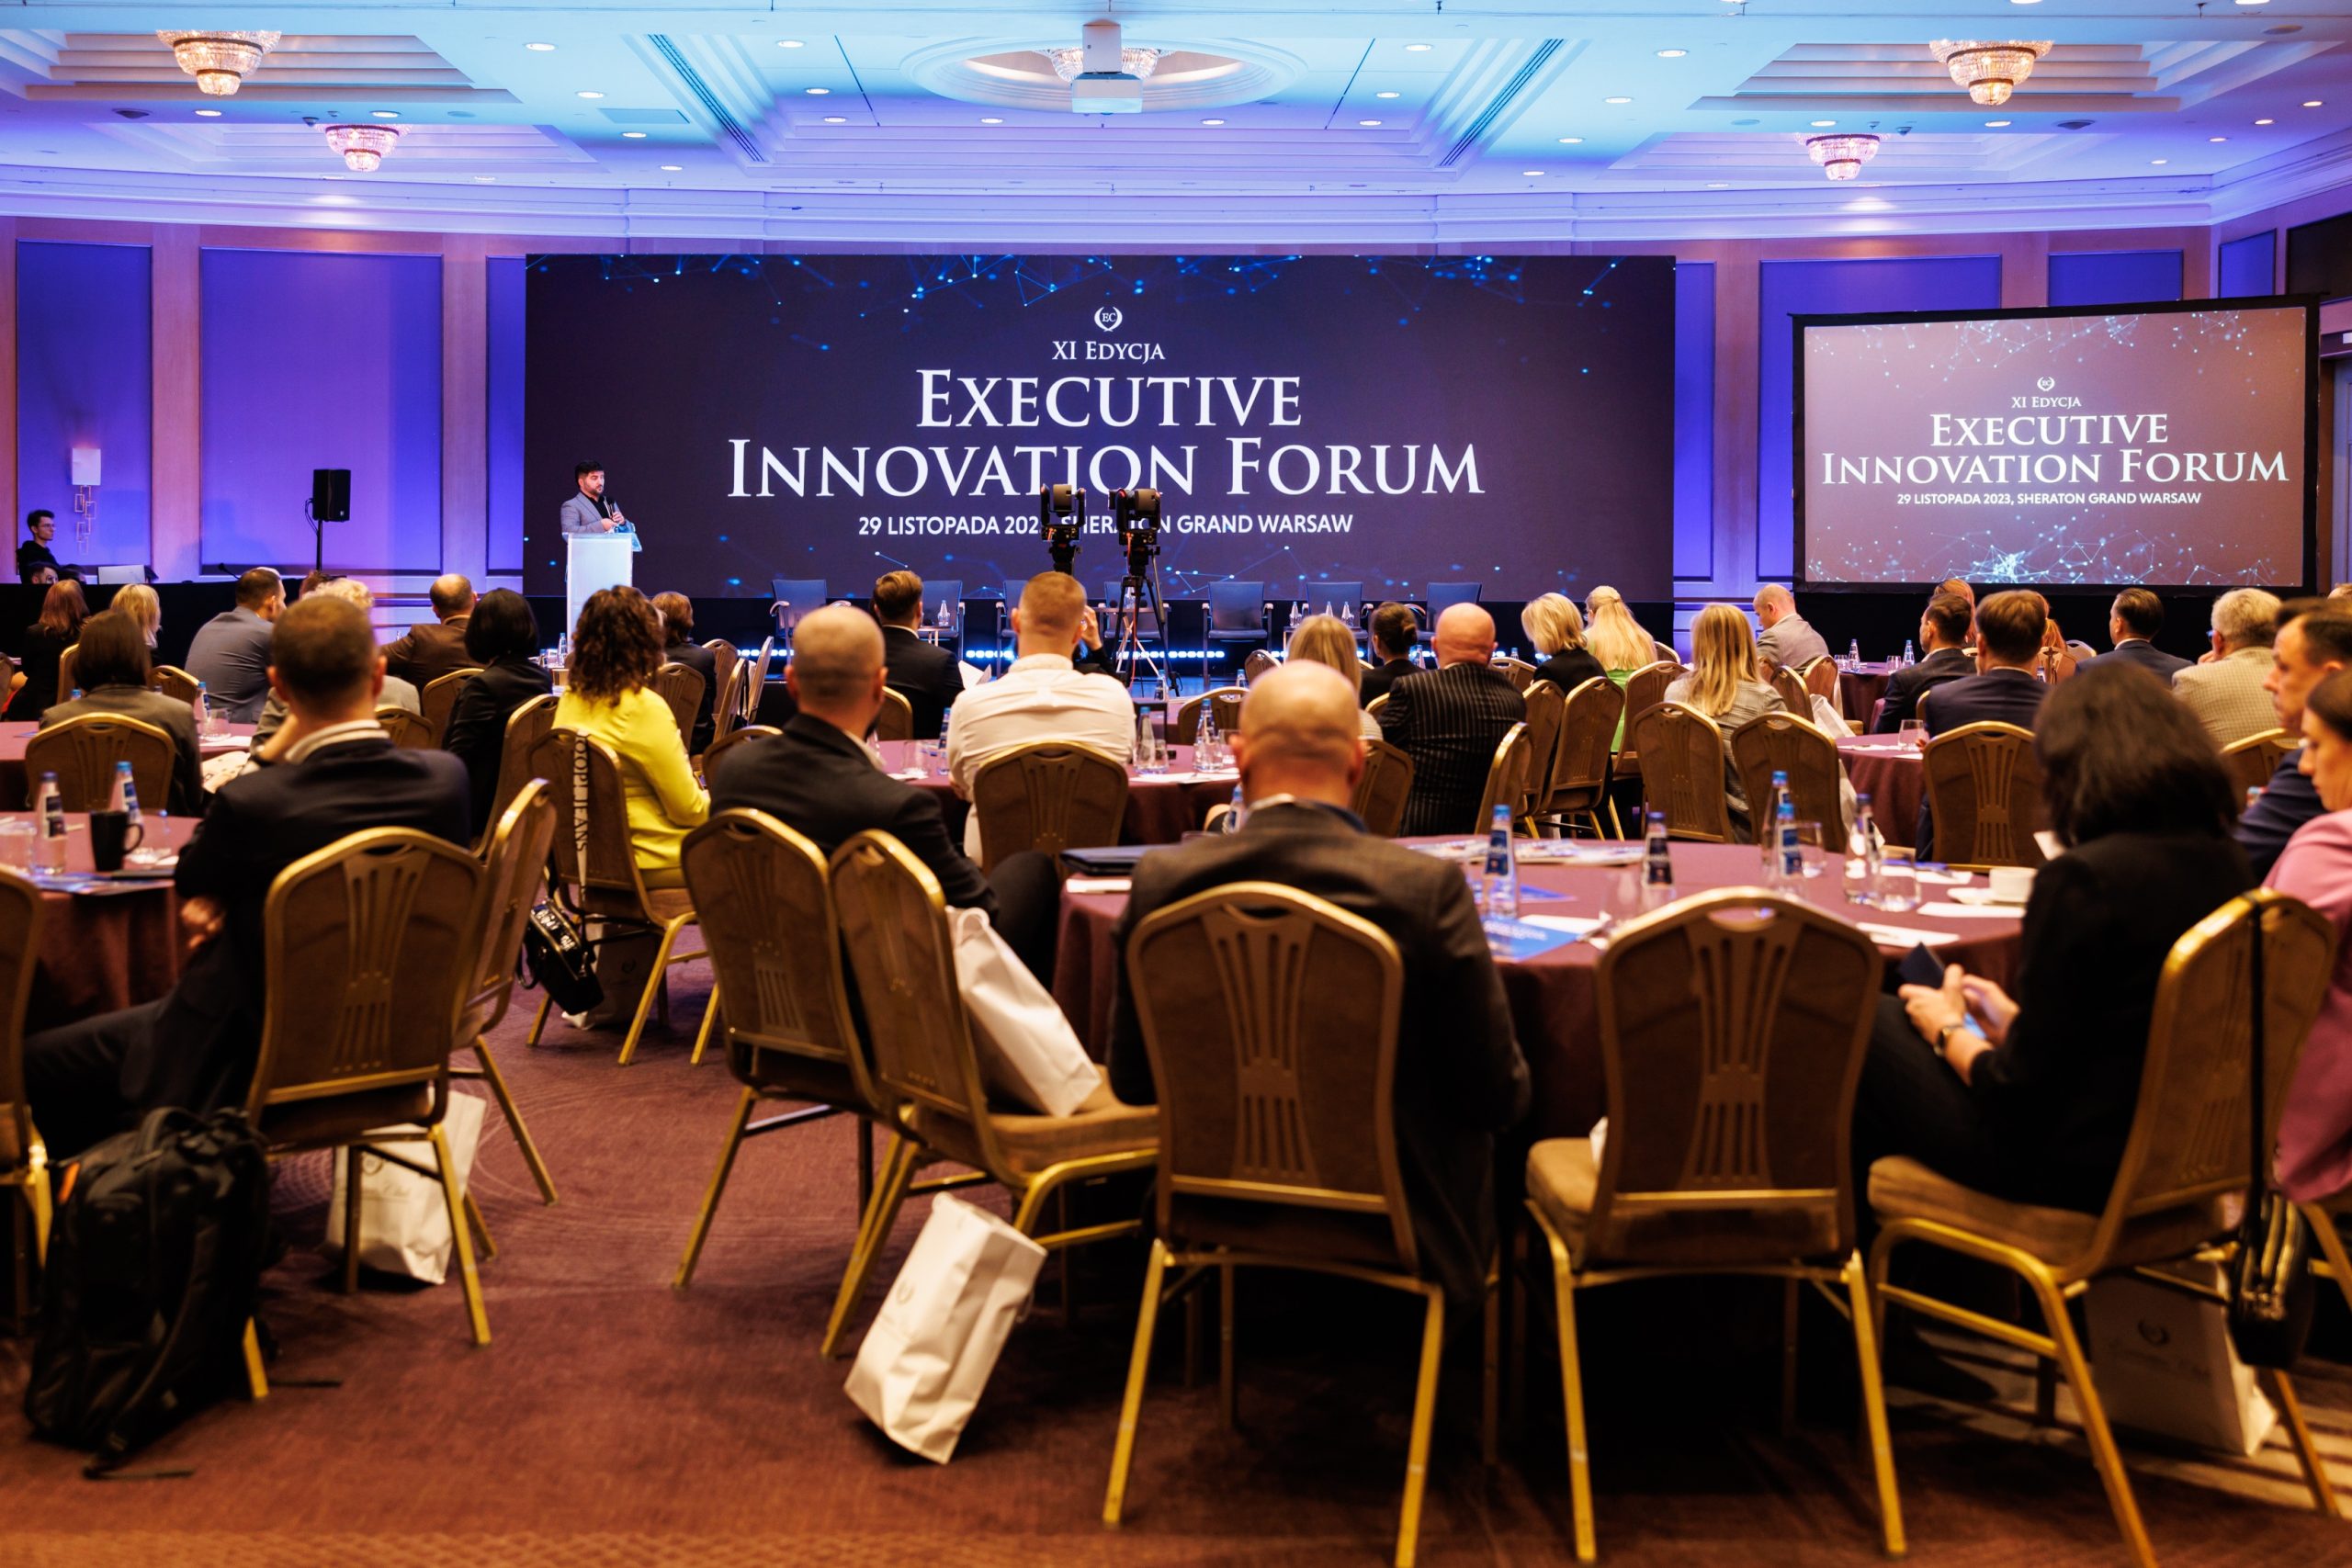 Coverage on the 11th edition of the Executive Innovation Forum